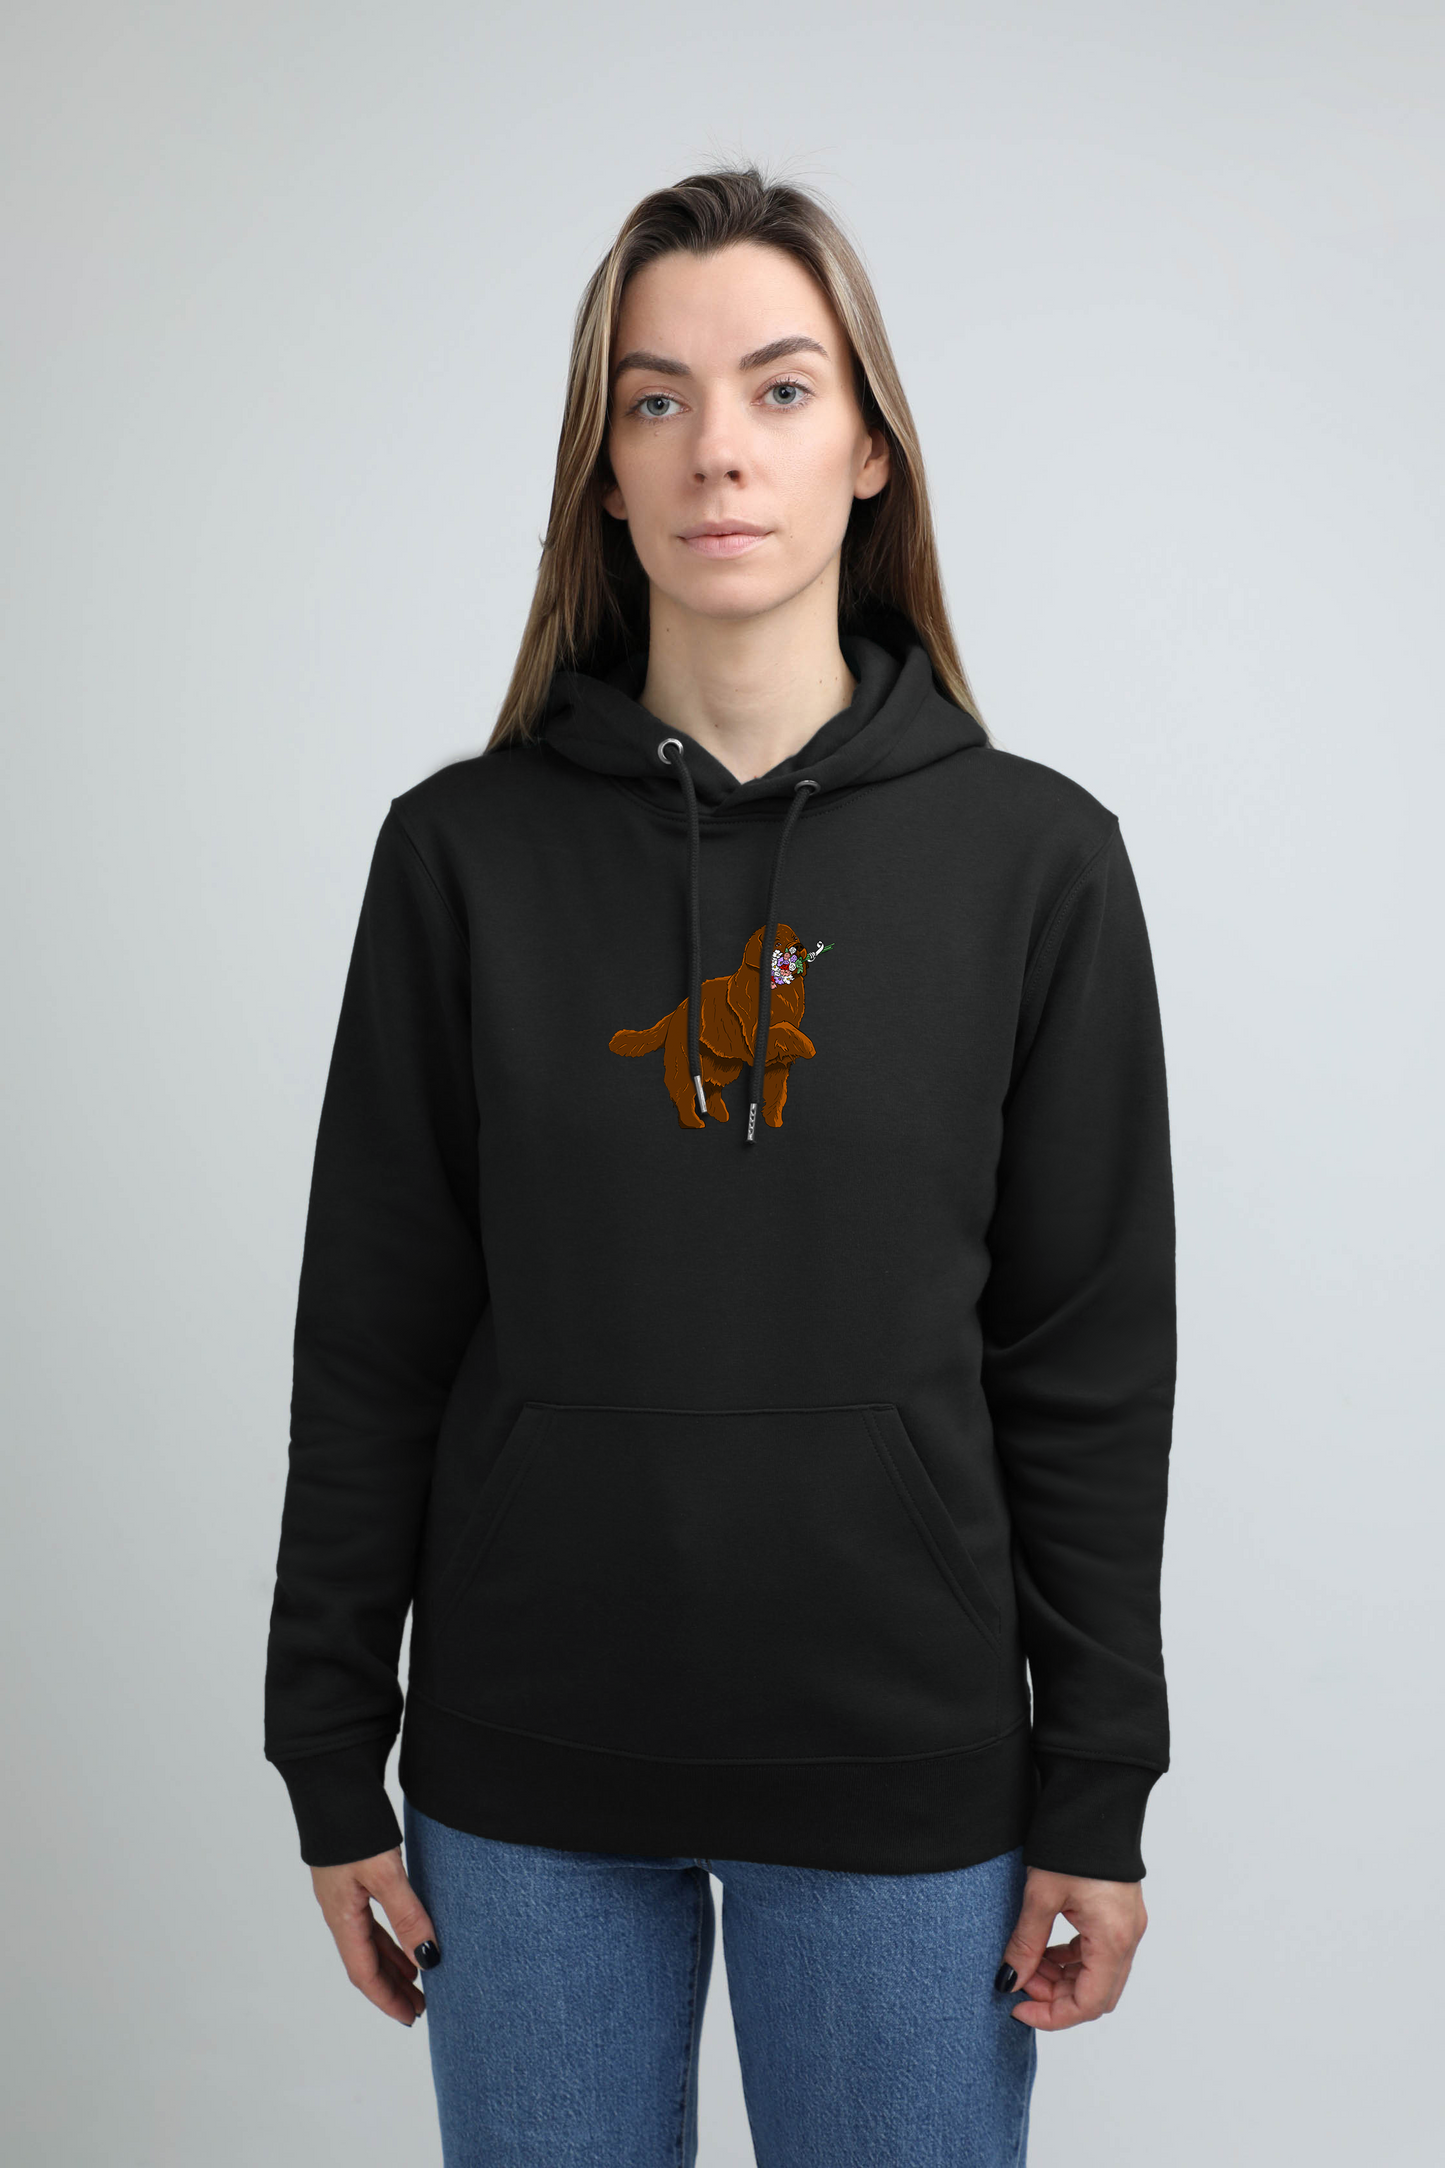 Giant dog with flowers | Hoodie with dog. Regular fit | Unisex - premium dog goods handmade in Europe by animalistus